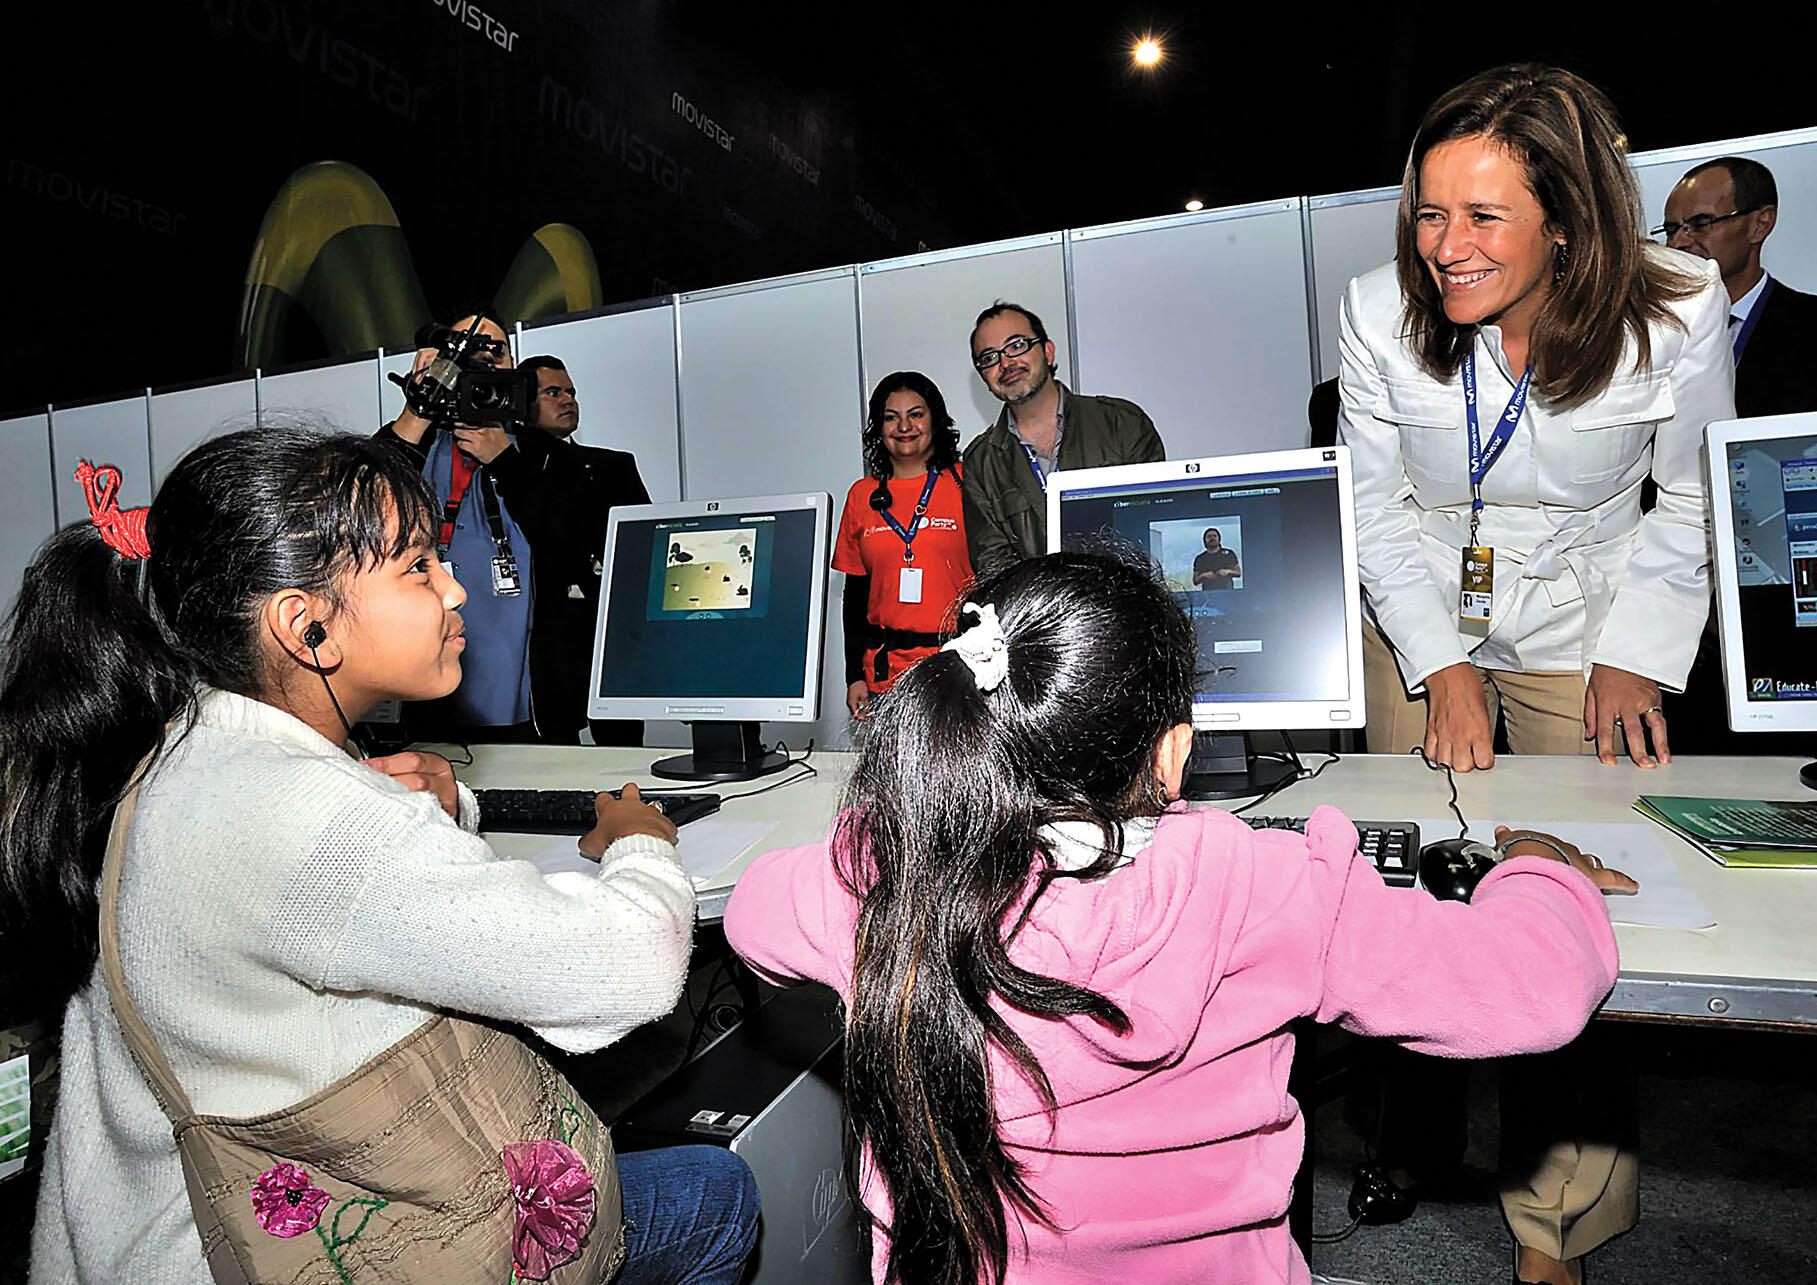 Schoolgirls working on computers at a table get a visit from Margarita Zavala, former First Lady of Mexico and current frontrunner for the PAN nomination. (Photo by editorialtripie.)